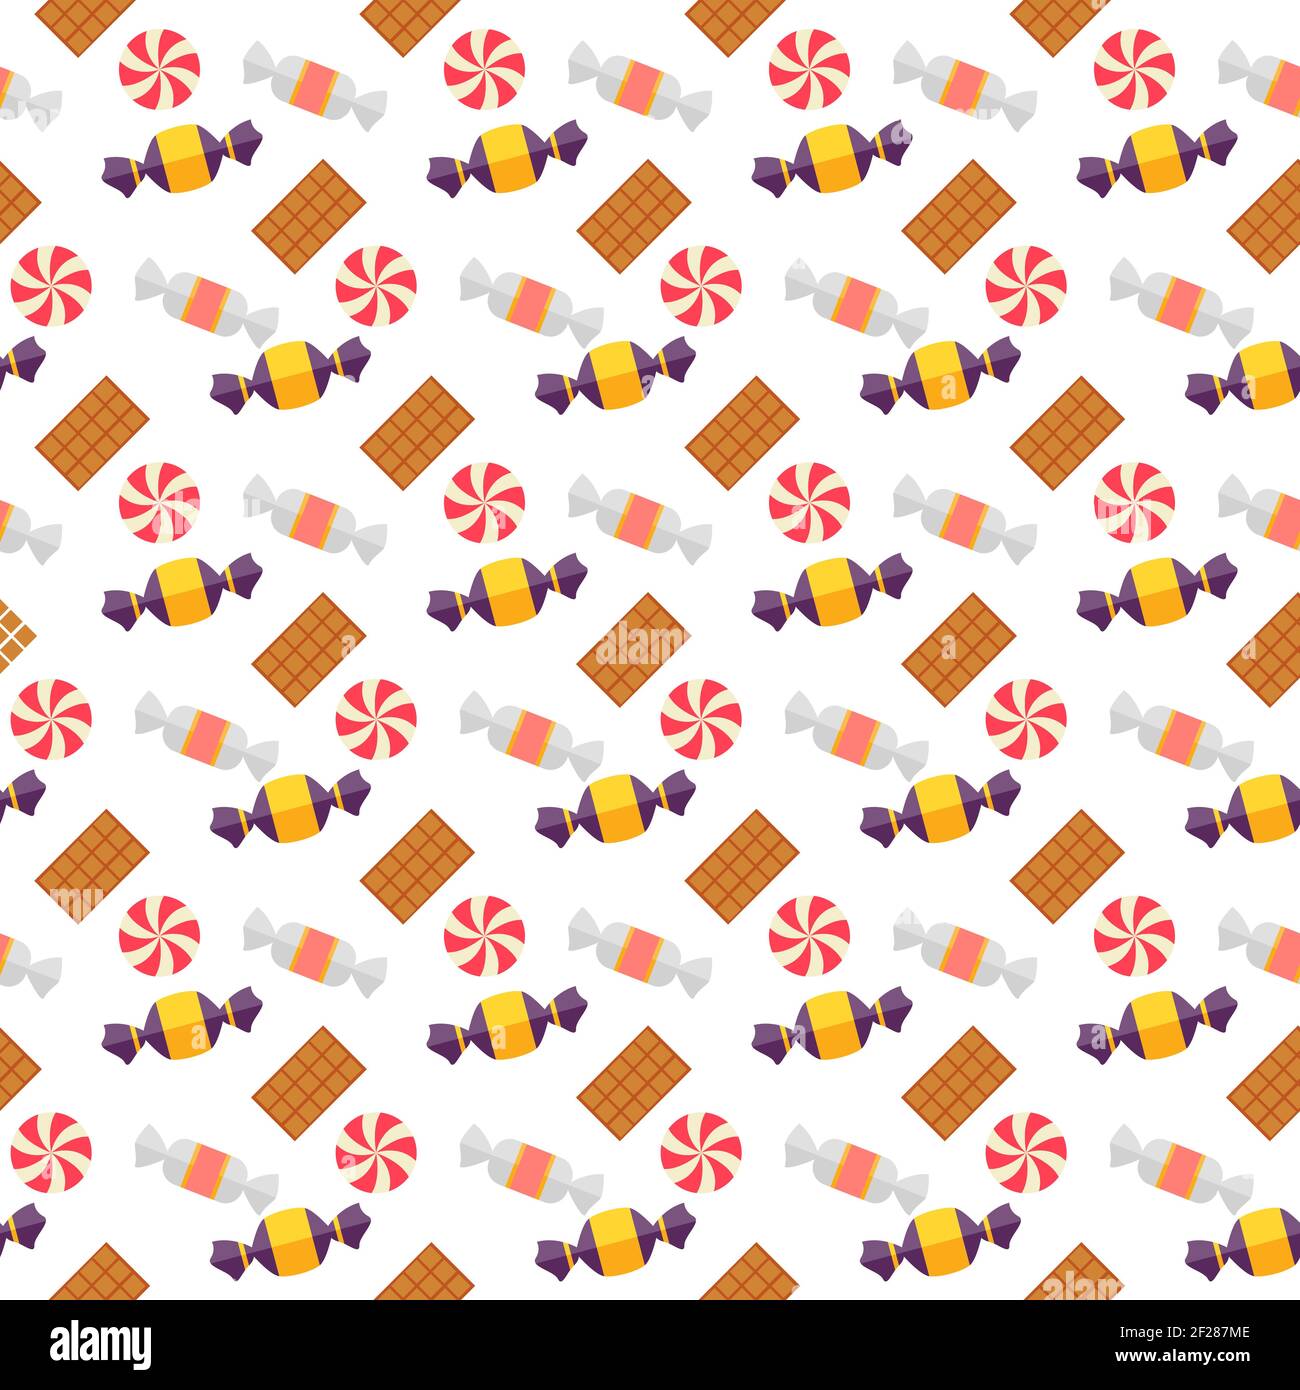 Sweet scandy and cookies seamless pattern with scattered boiled seets and toffees in wrappers  colorful striped spiral lollipops and rectangular biscu Stock Vector